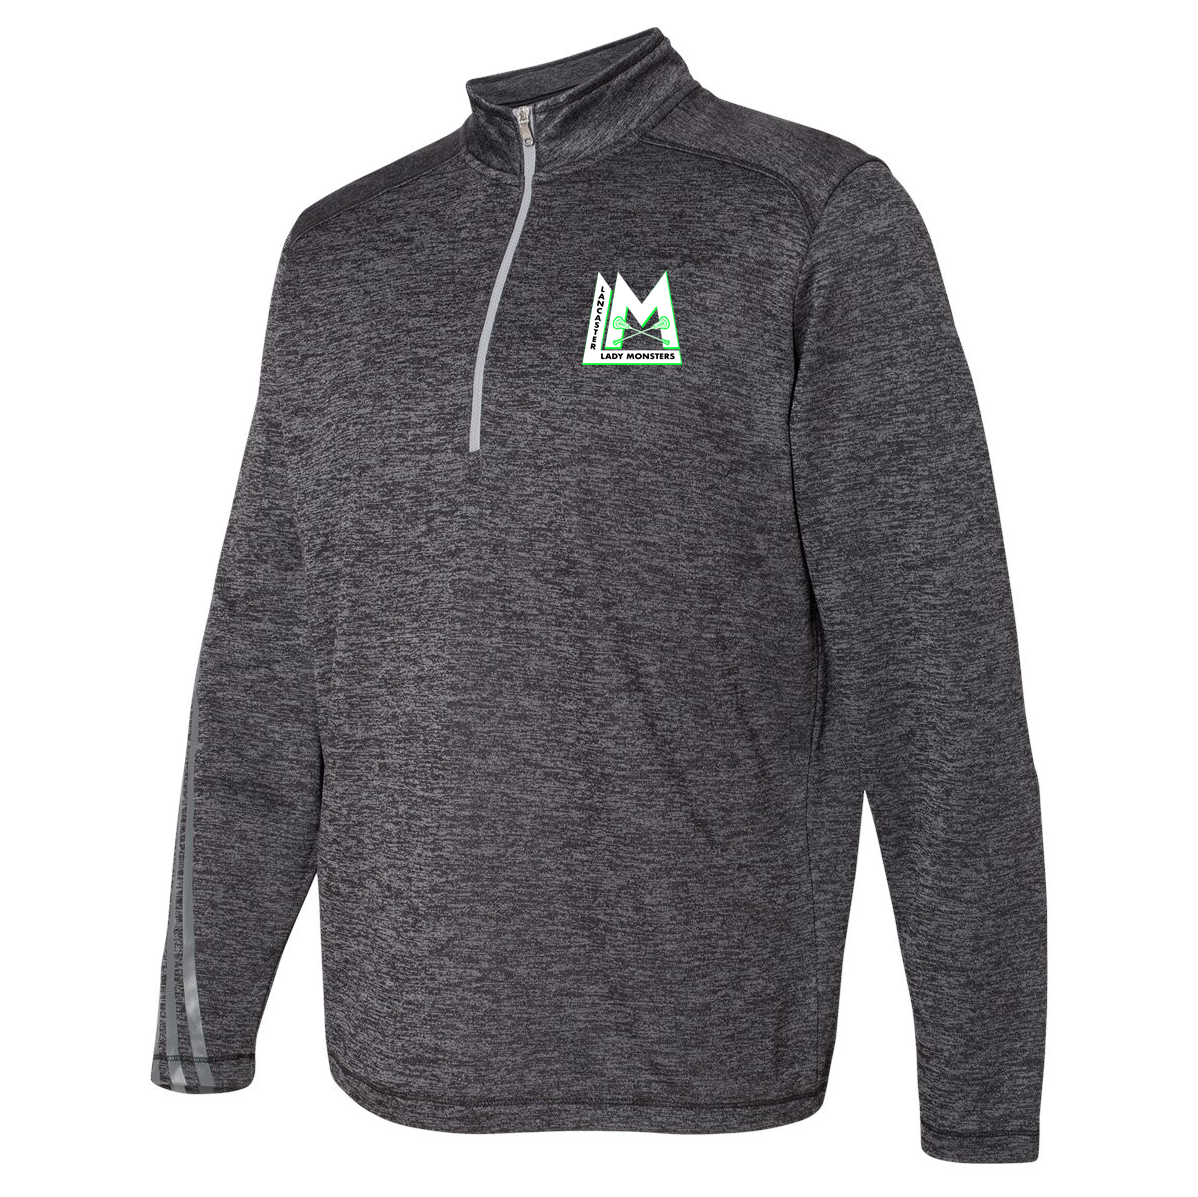 Lady Monsters Lacrosse Adidas Terry Heathered Quarter-Zip Pullover